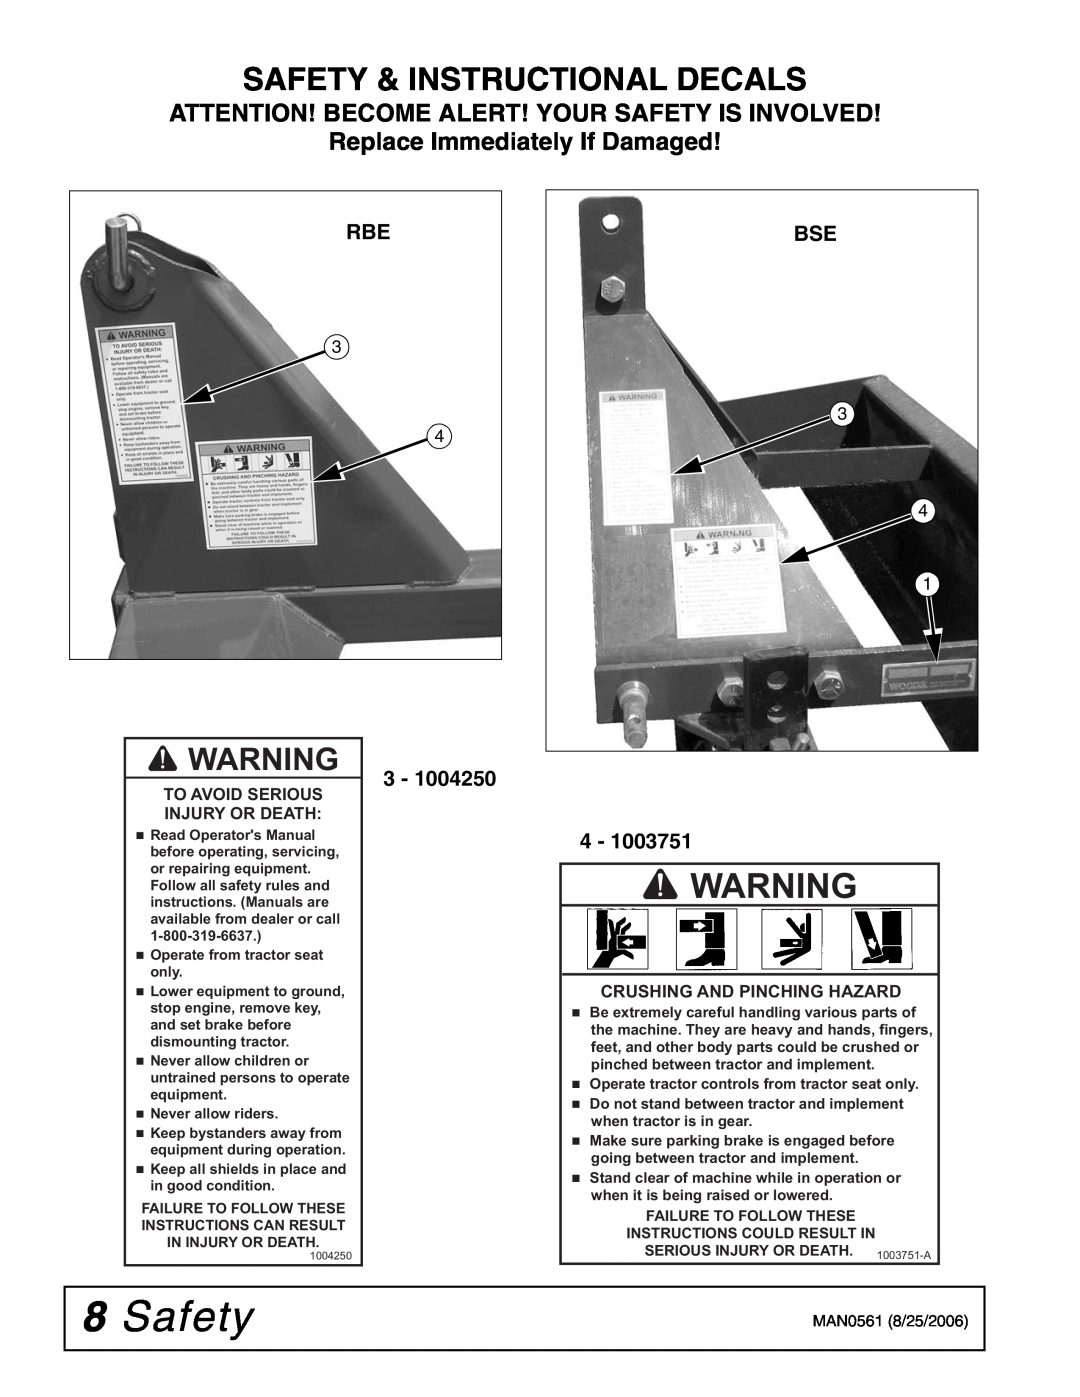 Woods Equipment BSE5, RBE5, RBE4 manual Safety & Instructional Decals, Attention! Become Alert! Your Safety Is Involved 